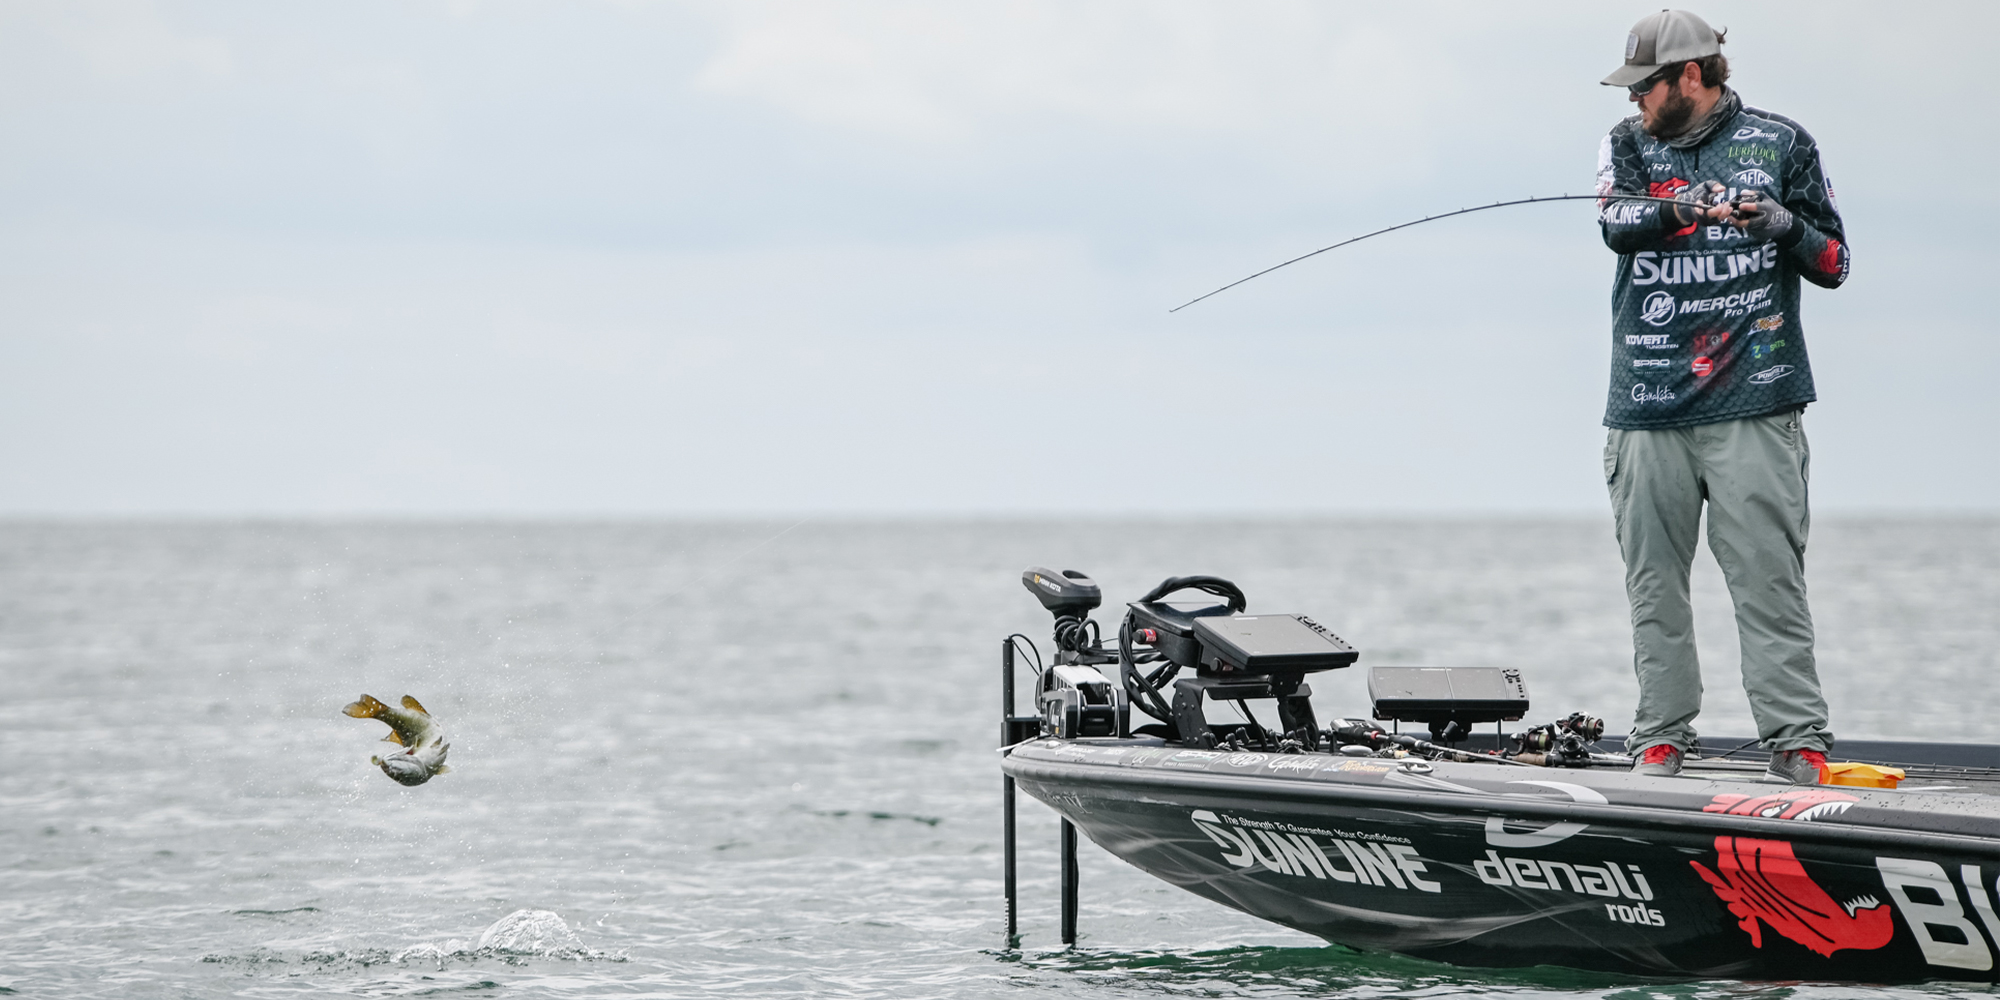 An Anglers Dream: Fishing Accessories For The Can-Am Defender